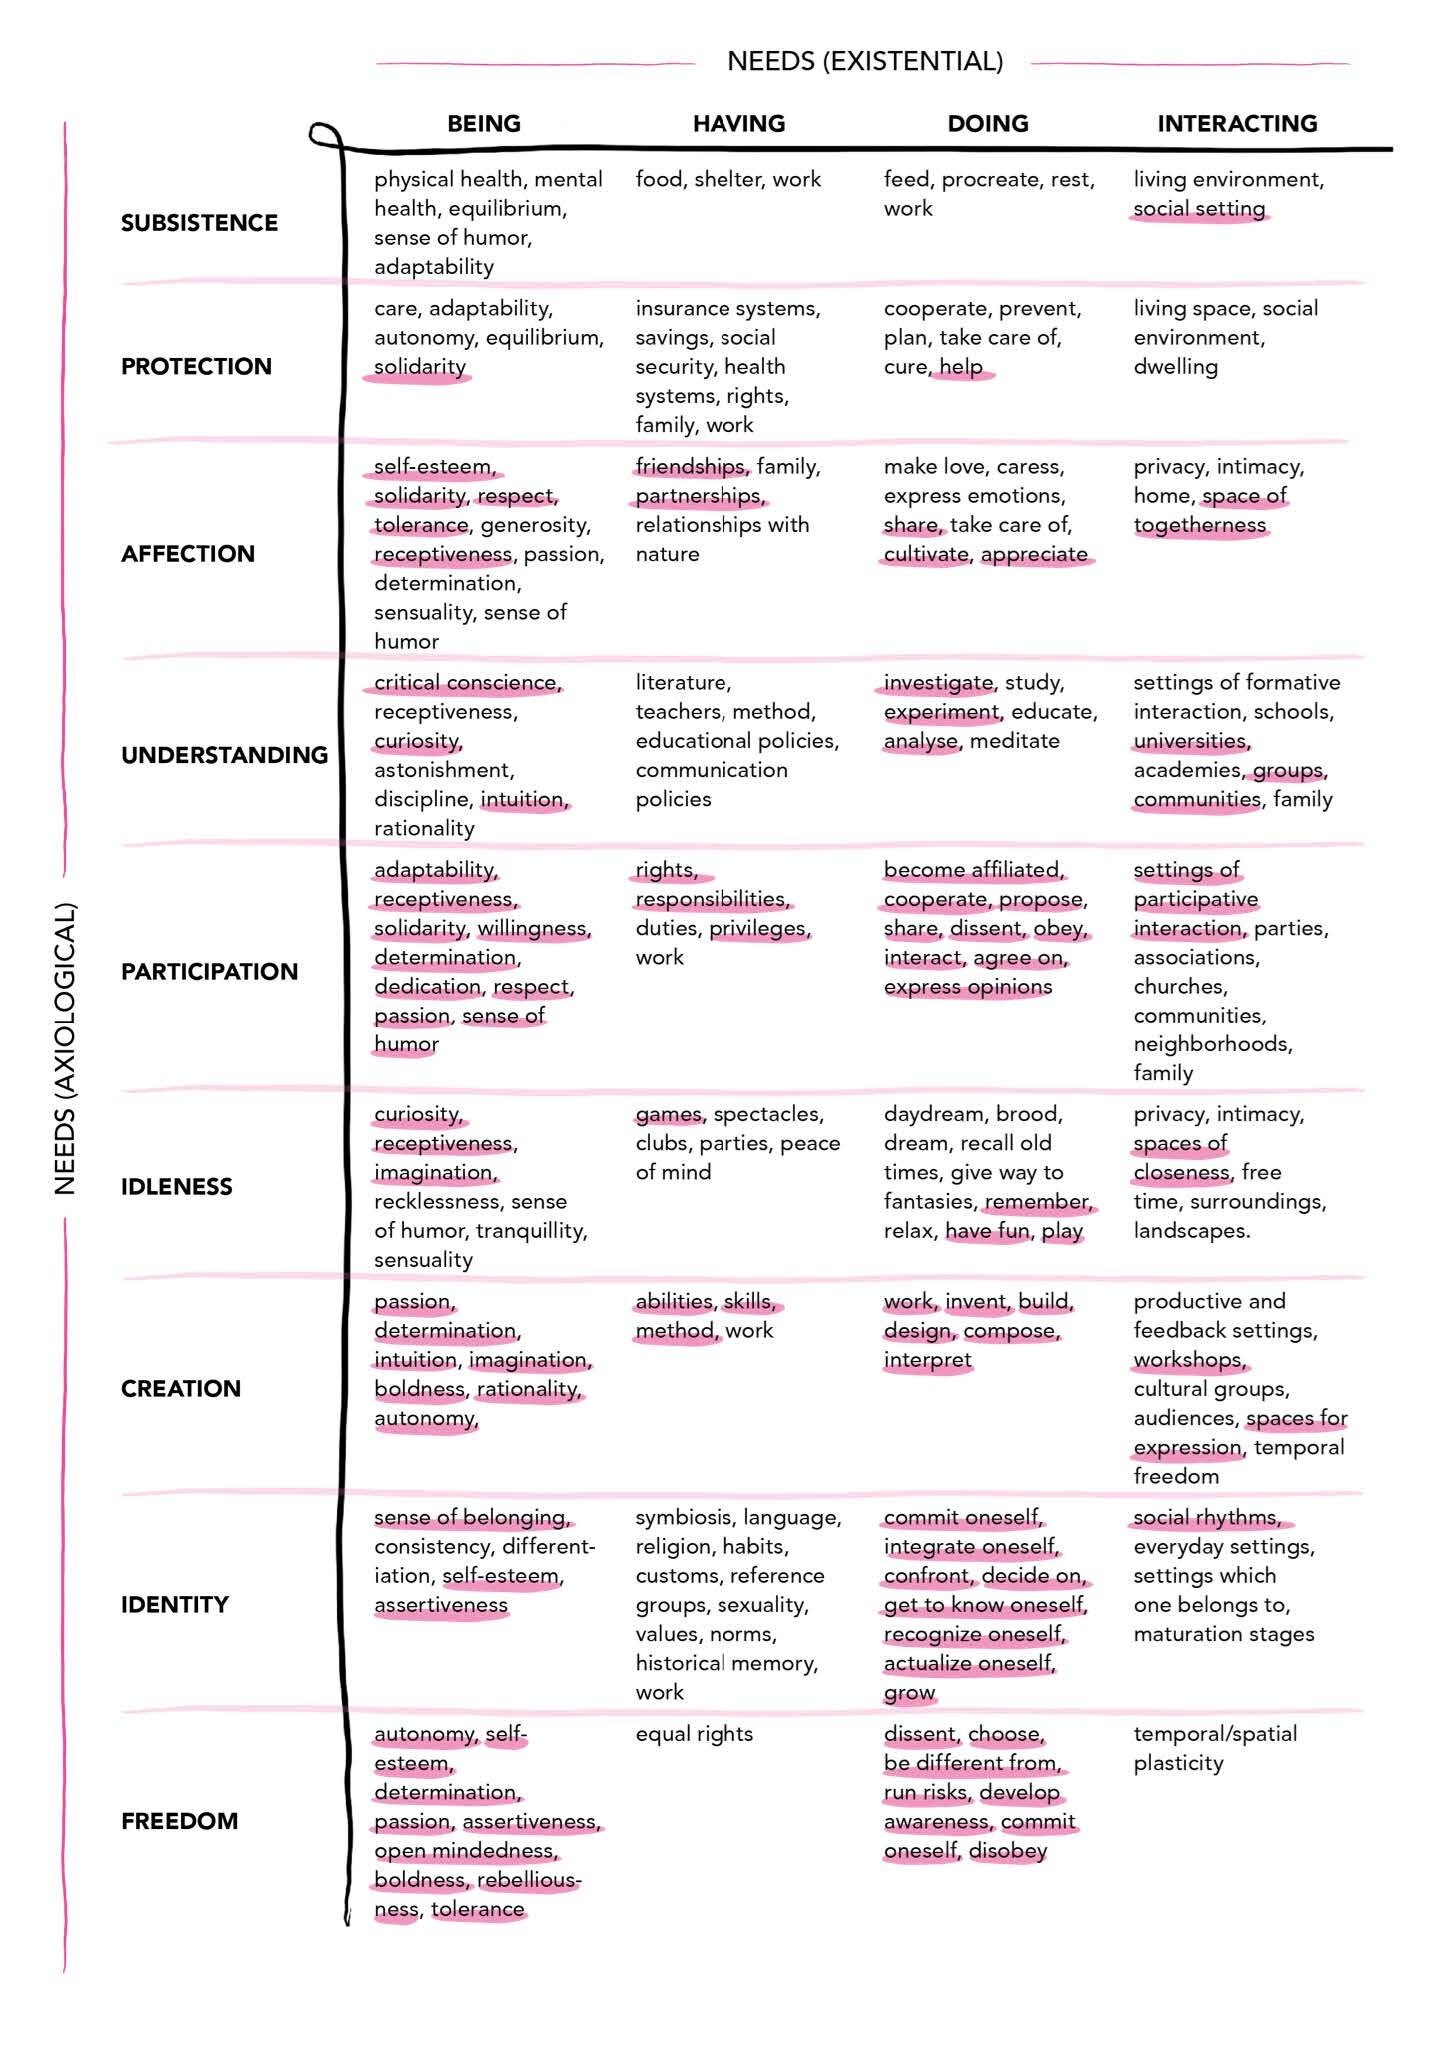 Figure 1. Matrix of Needs and Satisfiers (Max-Neef 2017) with possible satisfiers as provided through participation in a co-design process highlighted in pink.